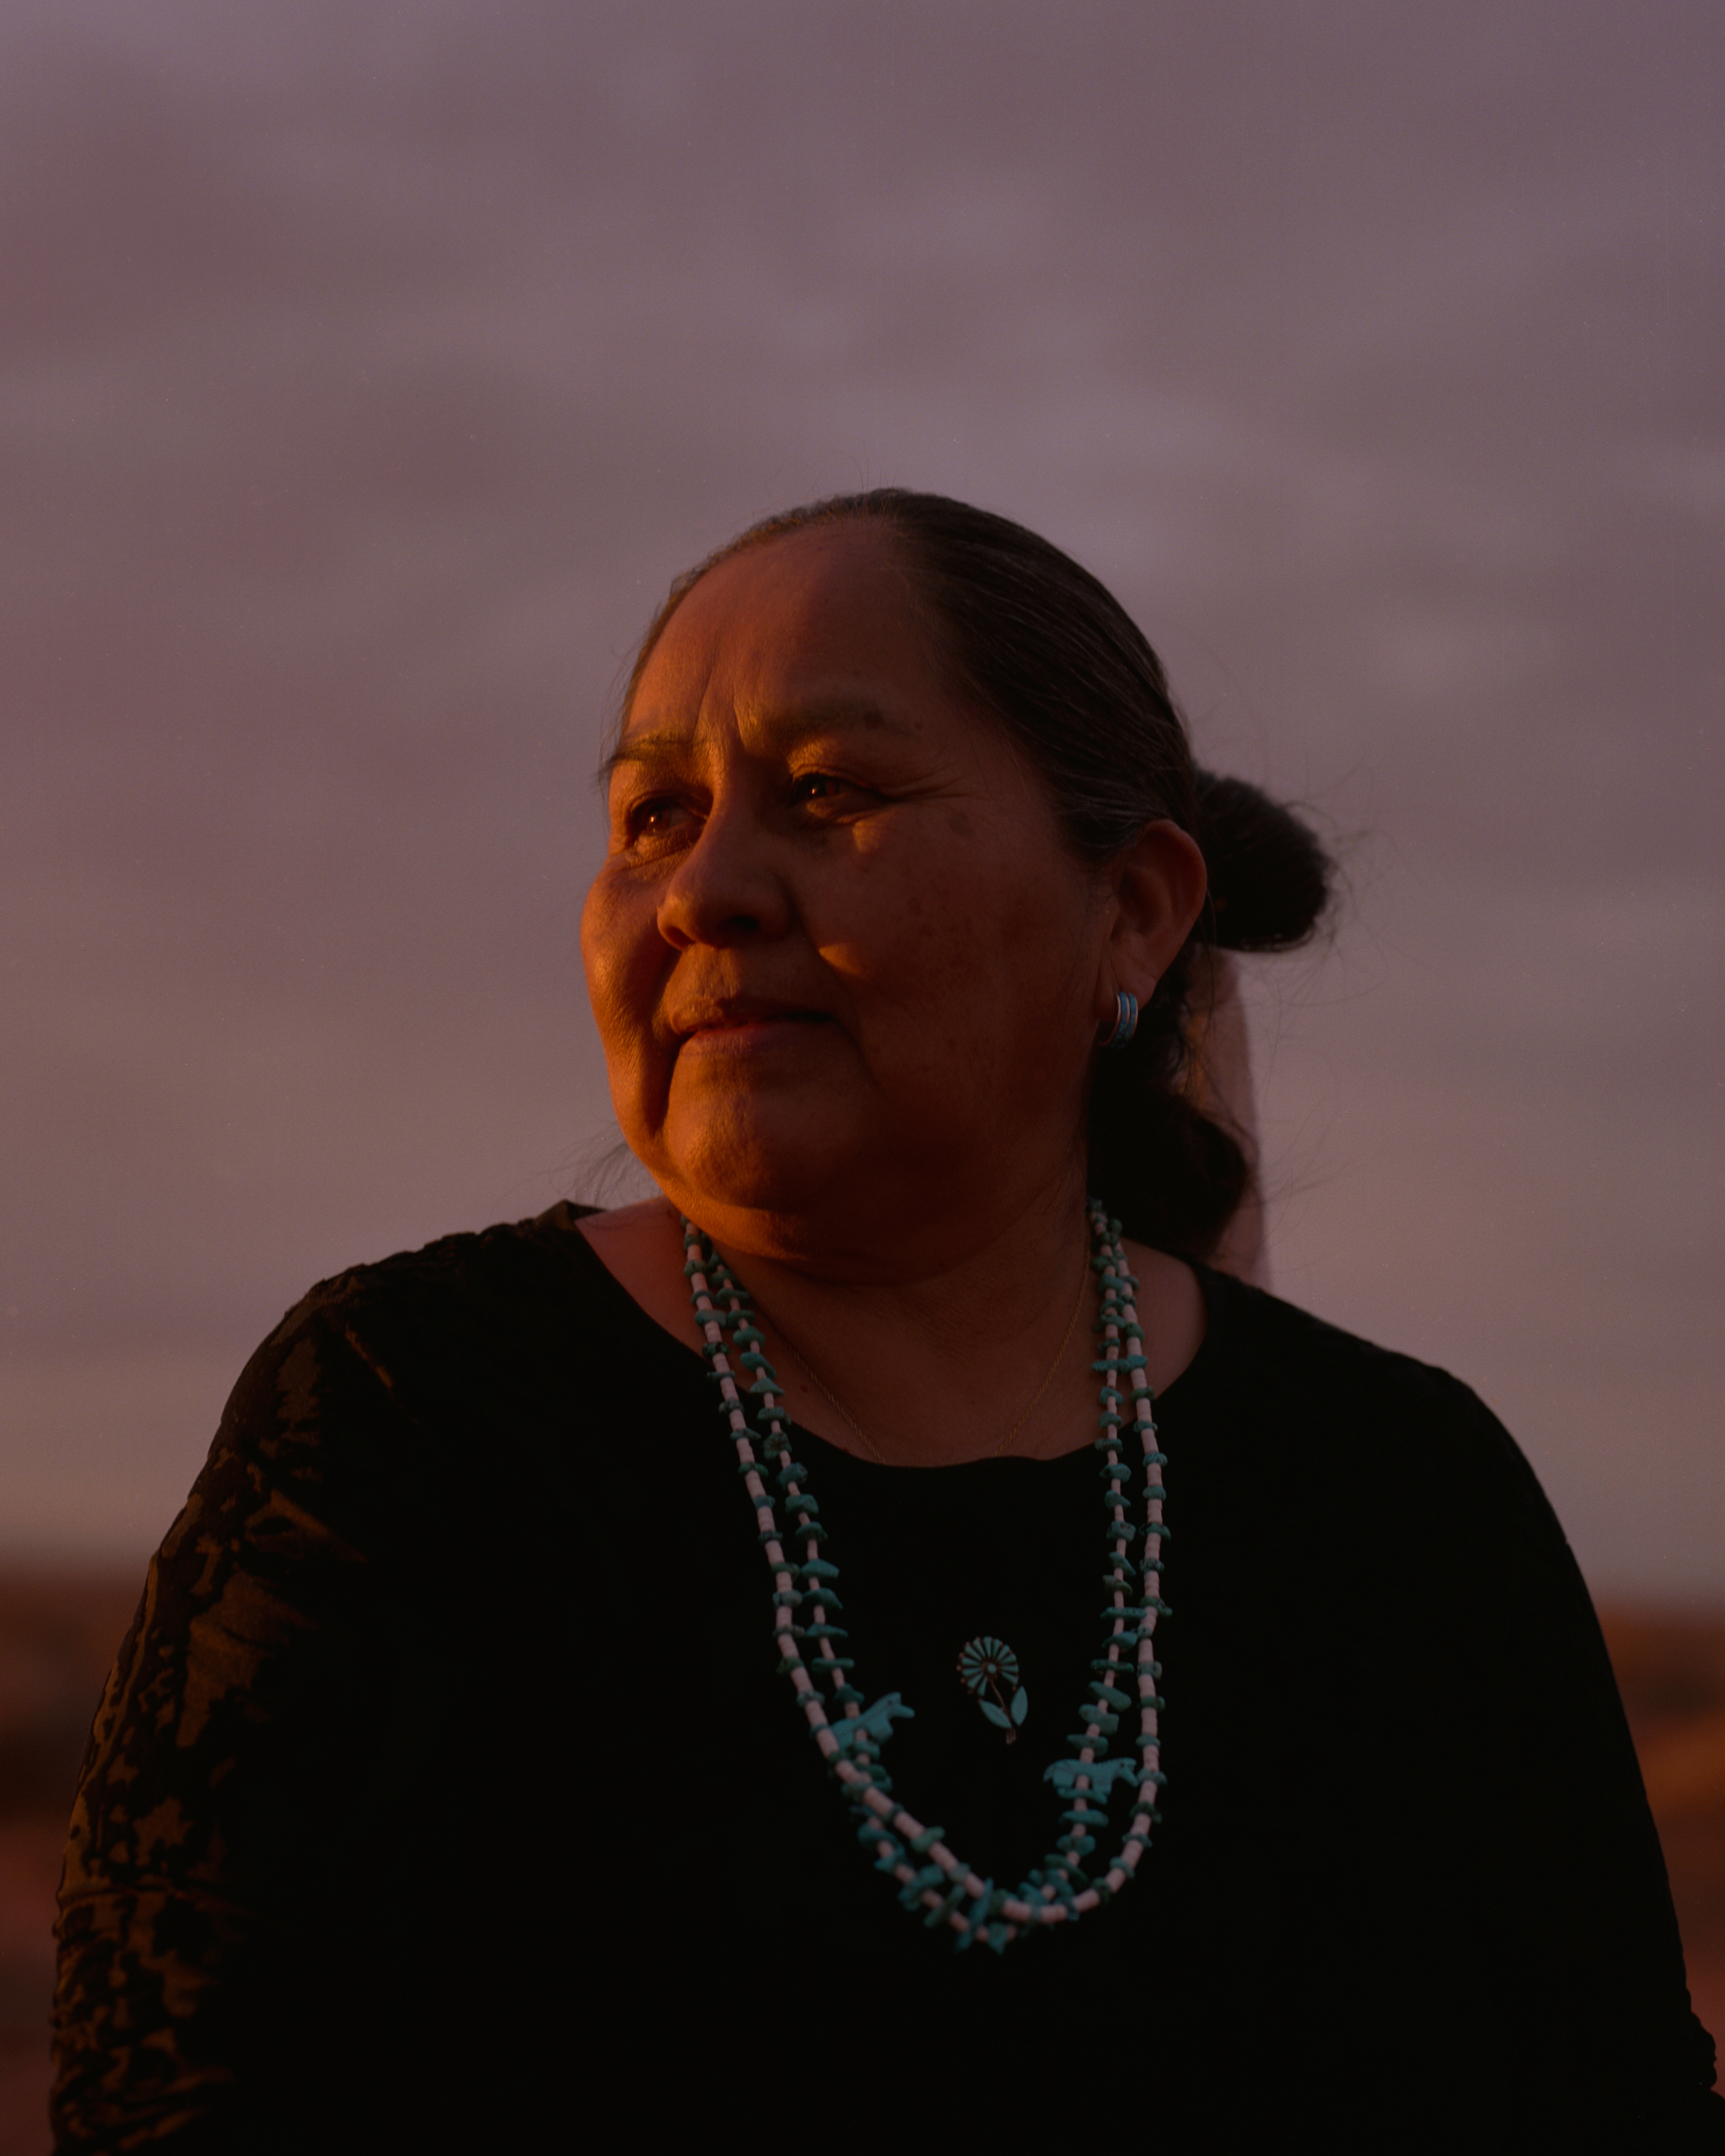 Elouise Wilson is pictured at her home in Monument Valley, on the Navajo reservation. Wilson is the mother of eight and lived with her family in a traditional hogan as recent as 2006. She is the mother of Cynthia Wilson, a Traditional Foods Program Director for the Utah Dine Bikeyah who is also helping to protect Bears Ears and its cultural traditions. (Ryan Shorosky for TIME)